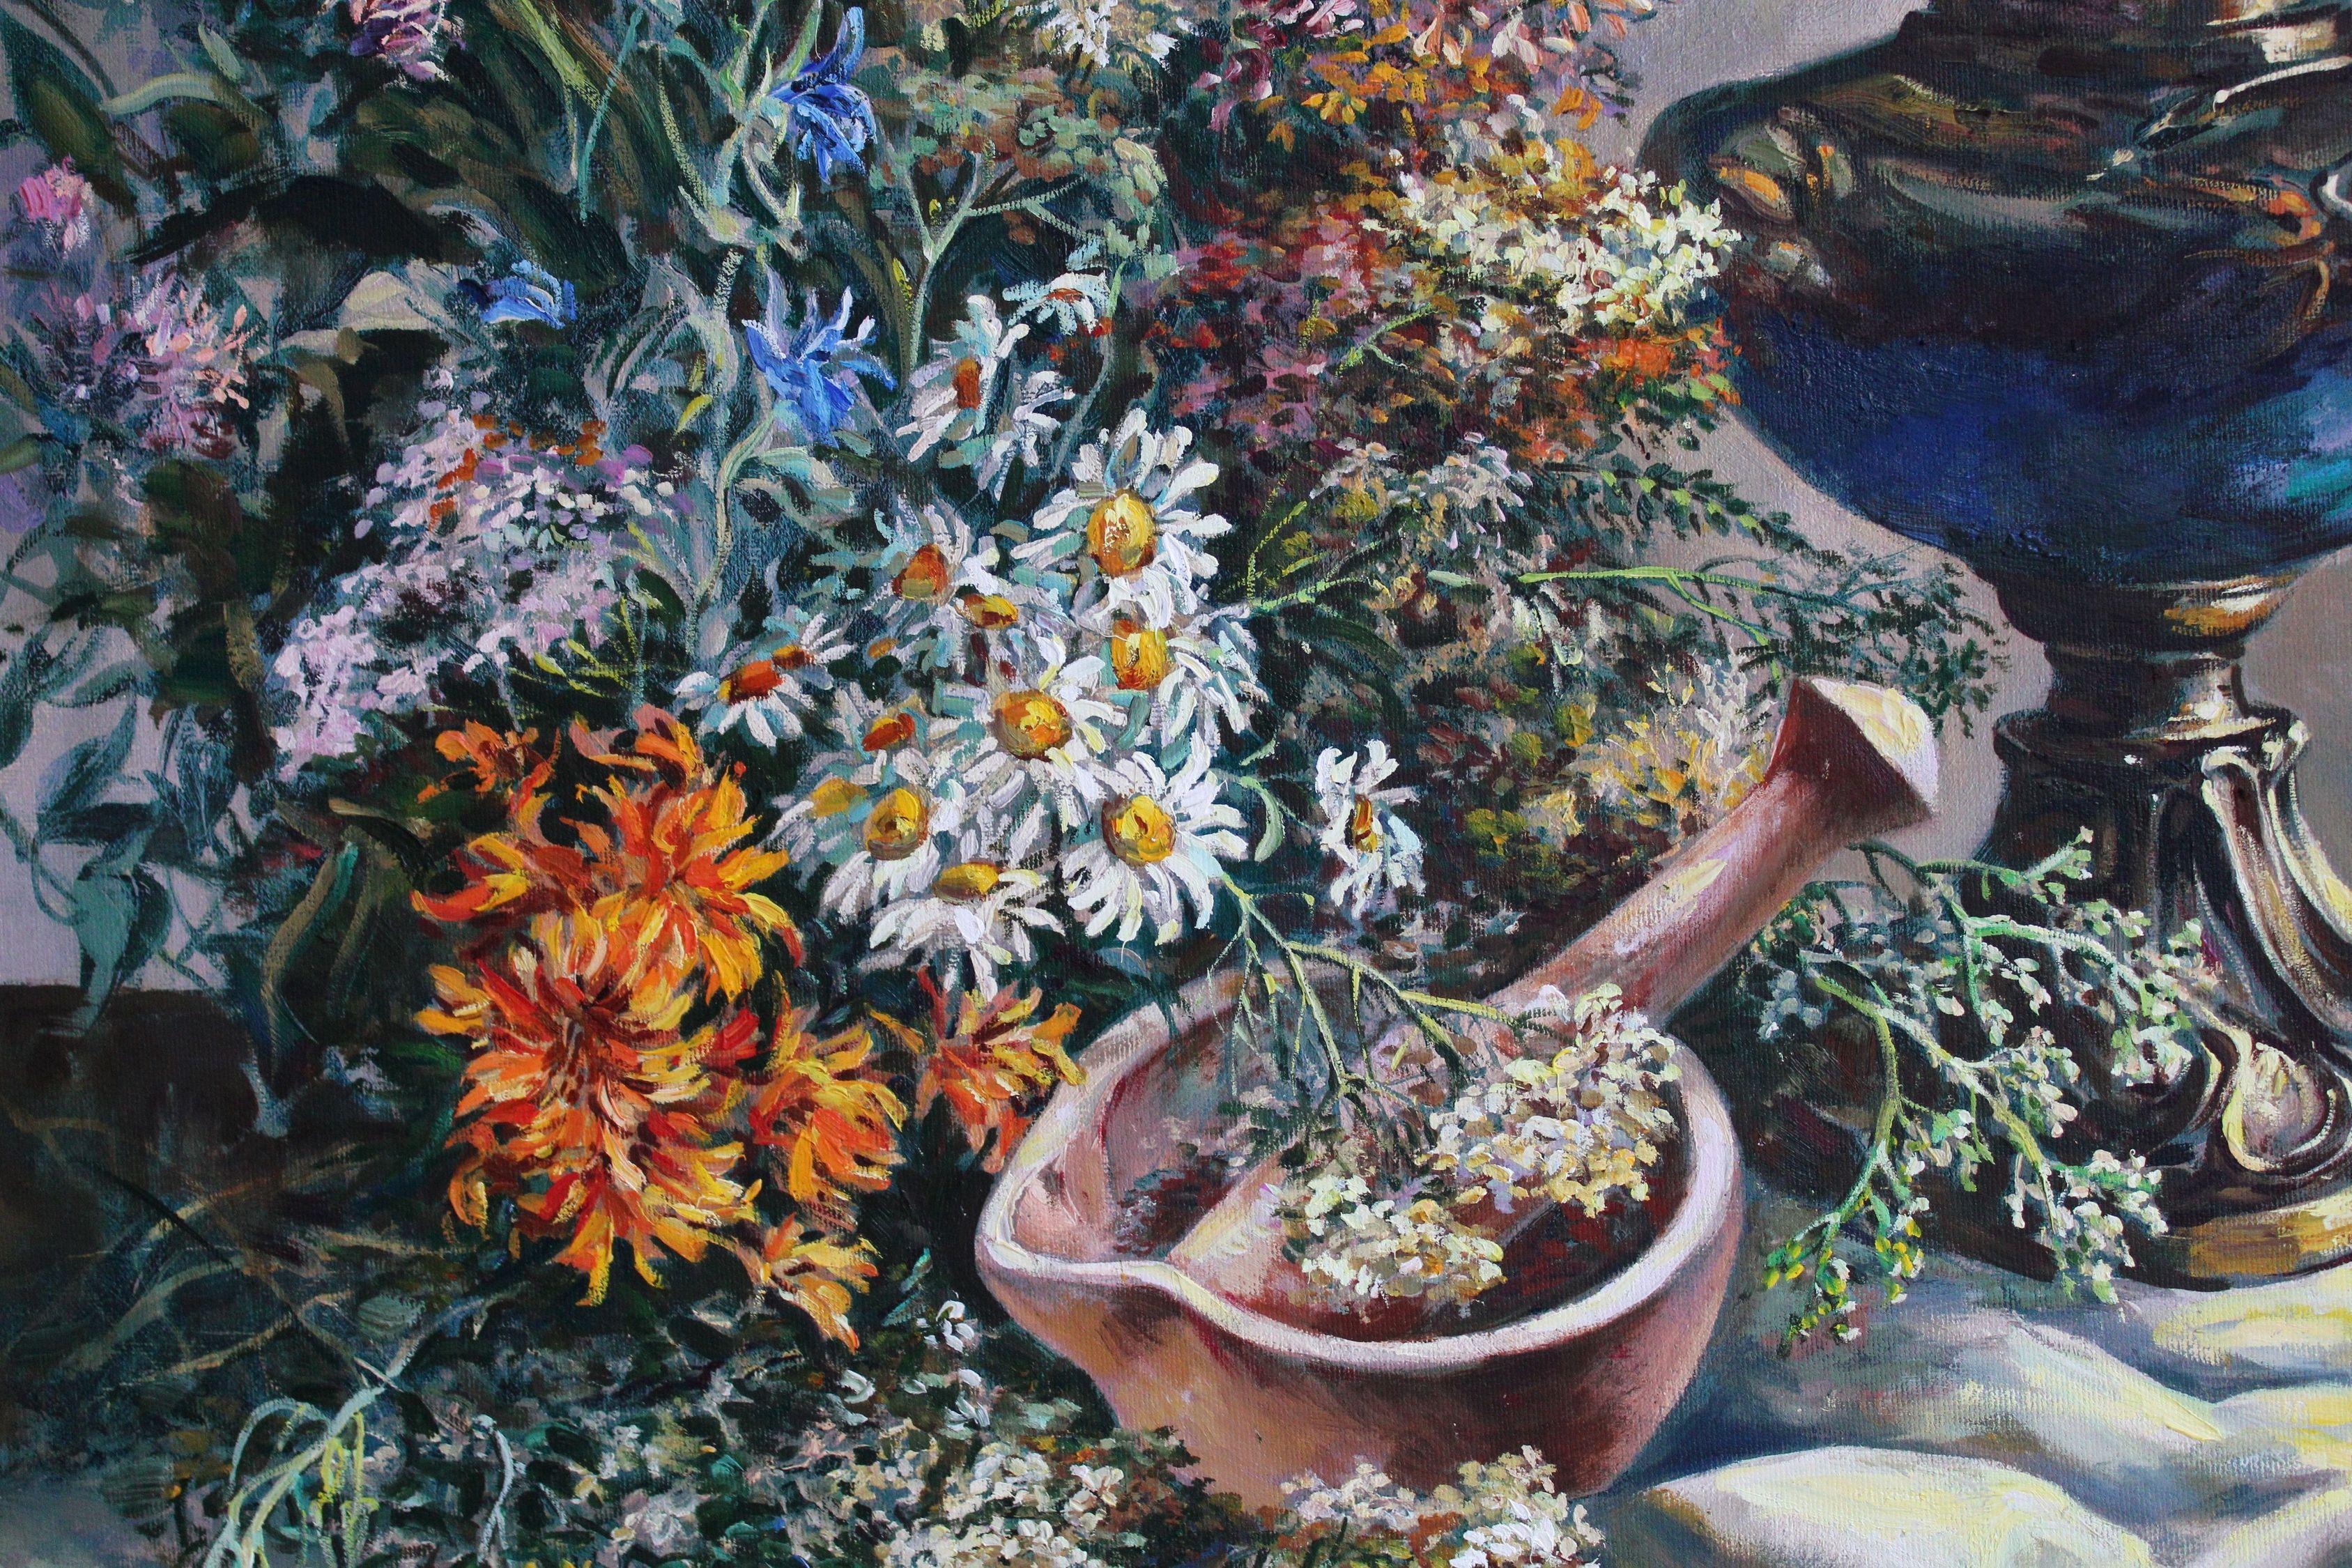 Still life with wildflowers. Oil on canvas, 80.5x60.5 cm

